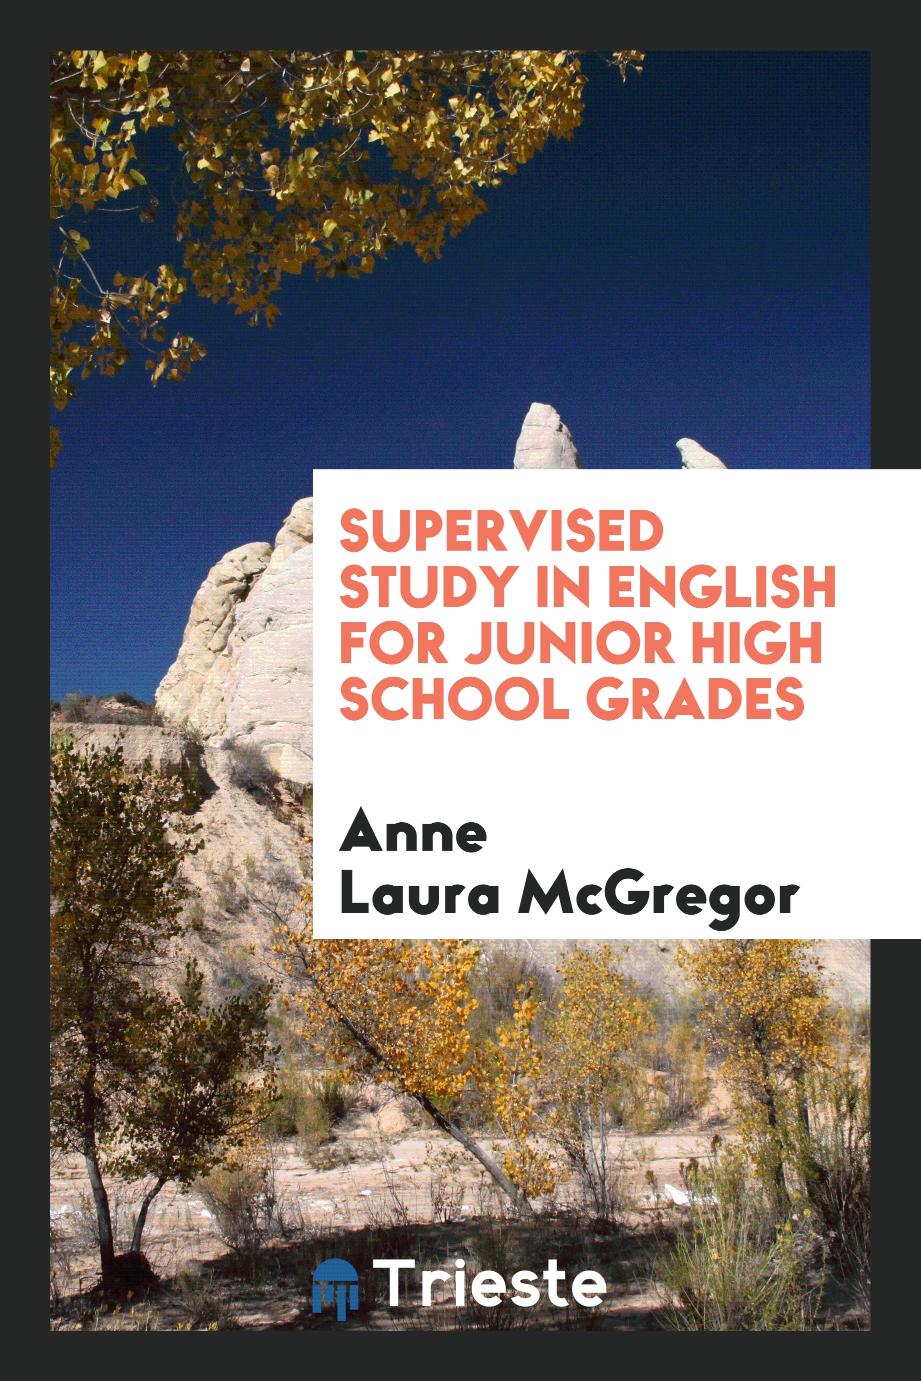 Supervised study in English for junior high school grades